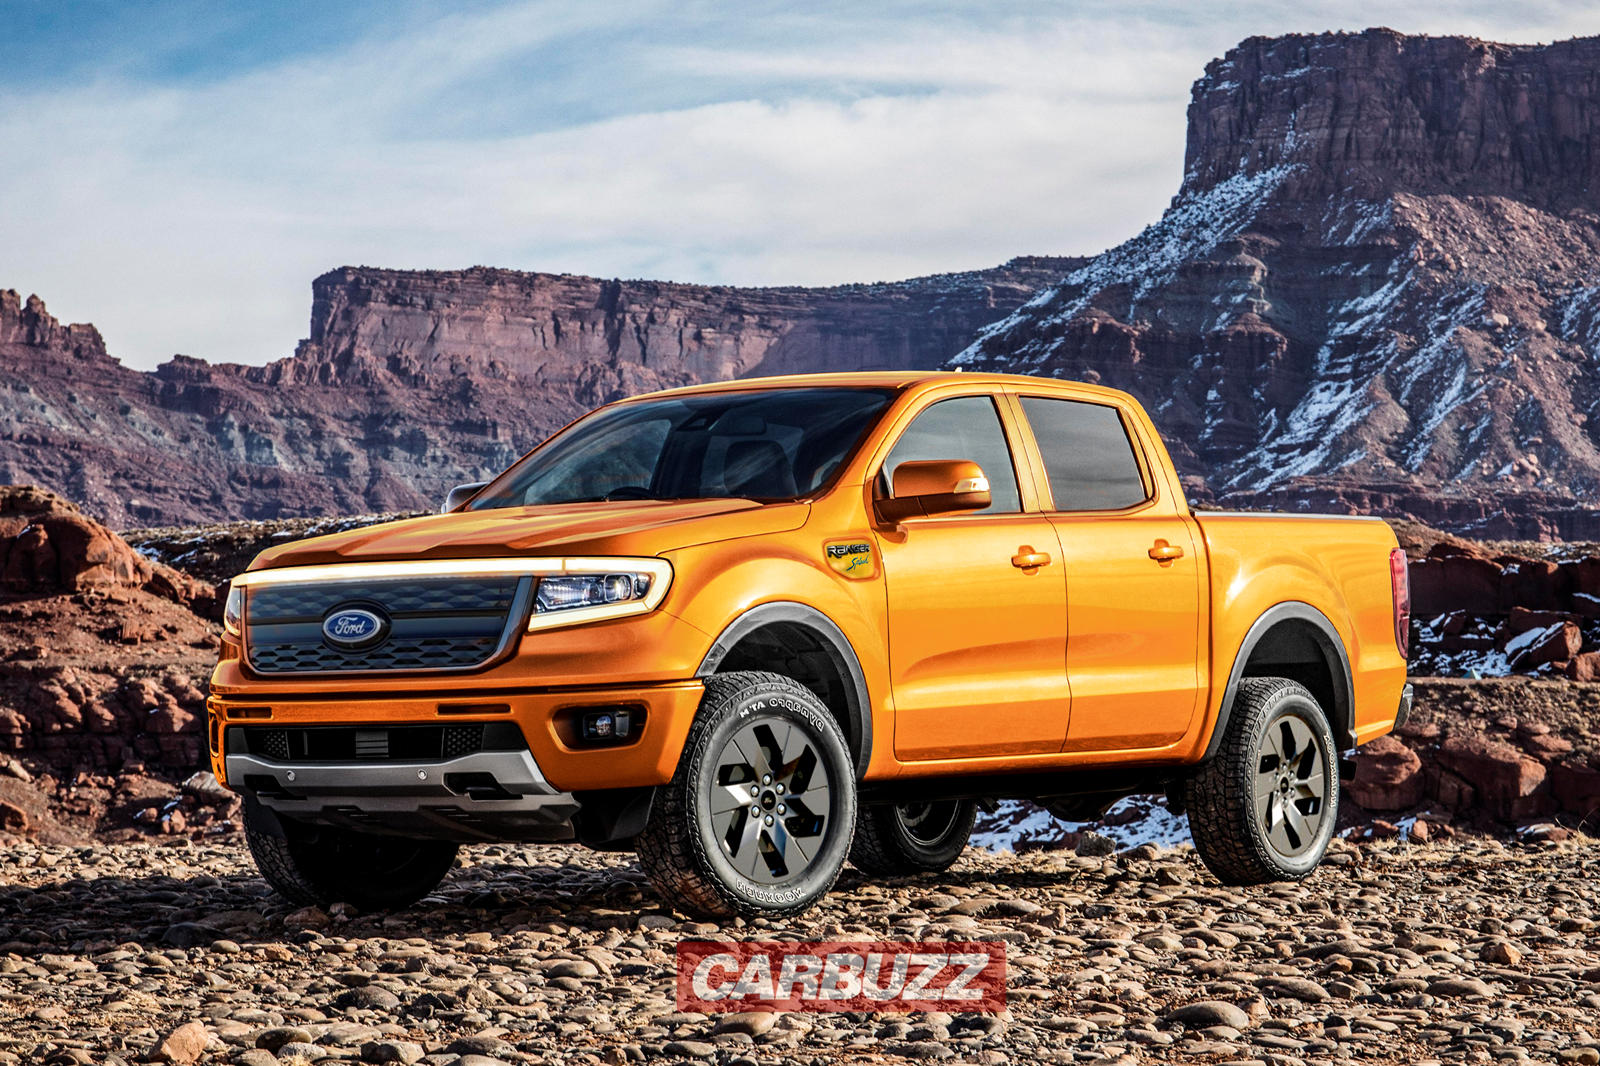 ford-ranger-splash-to-be-revived-as-electric-truck-carbuzz